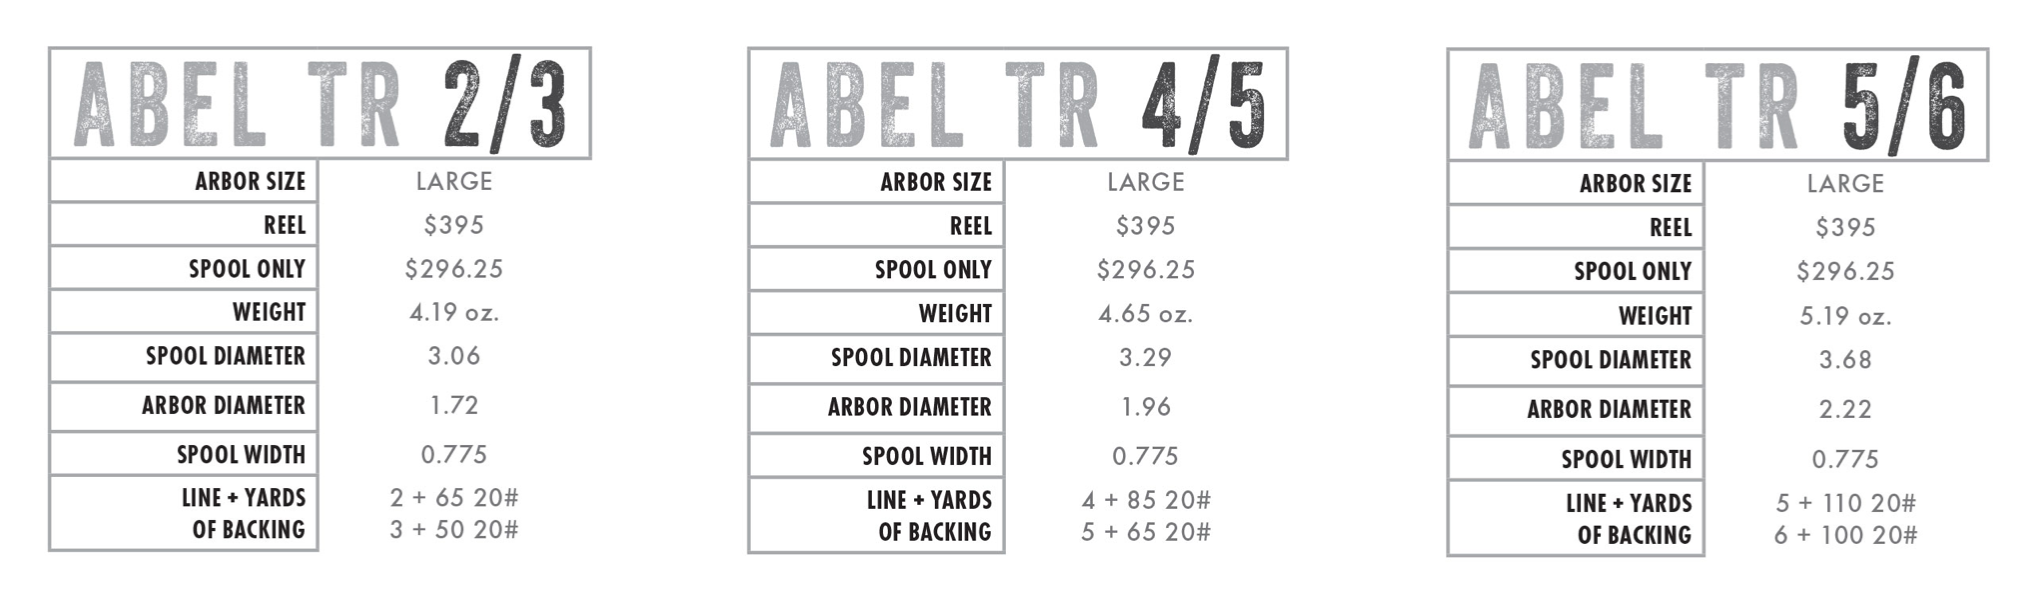 Abel TR Fly Reel Backing Capacity